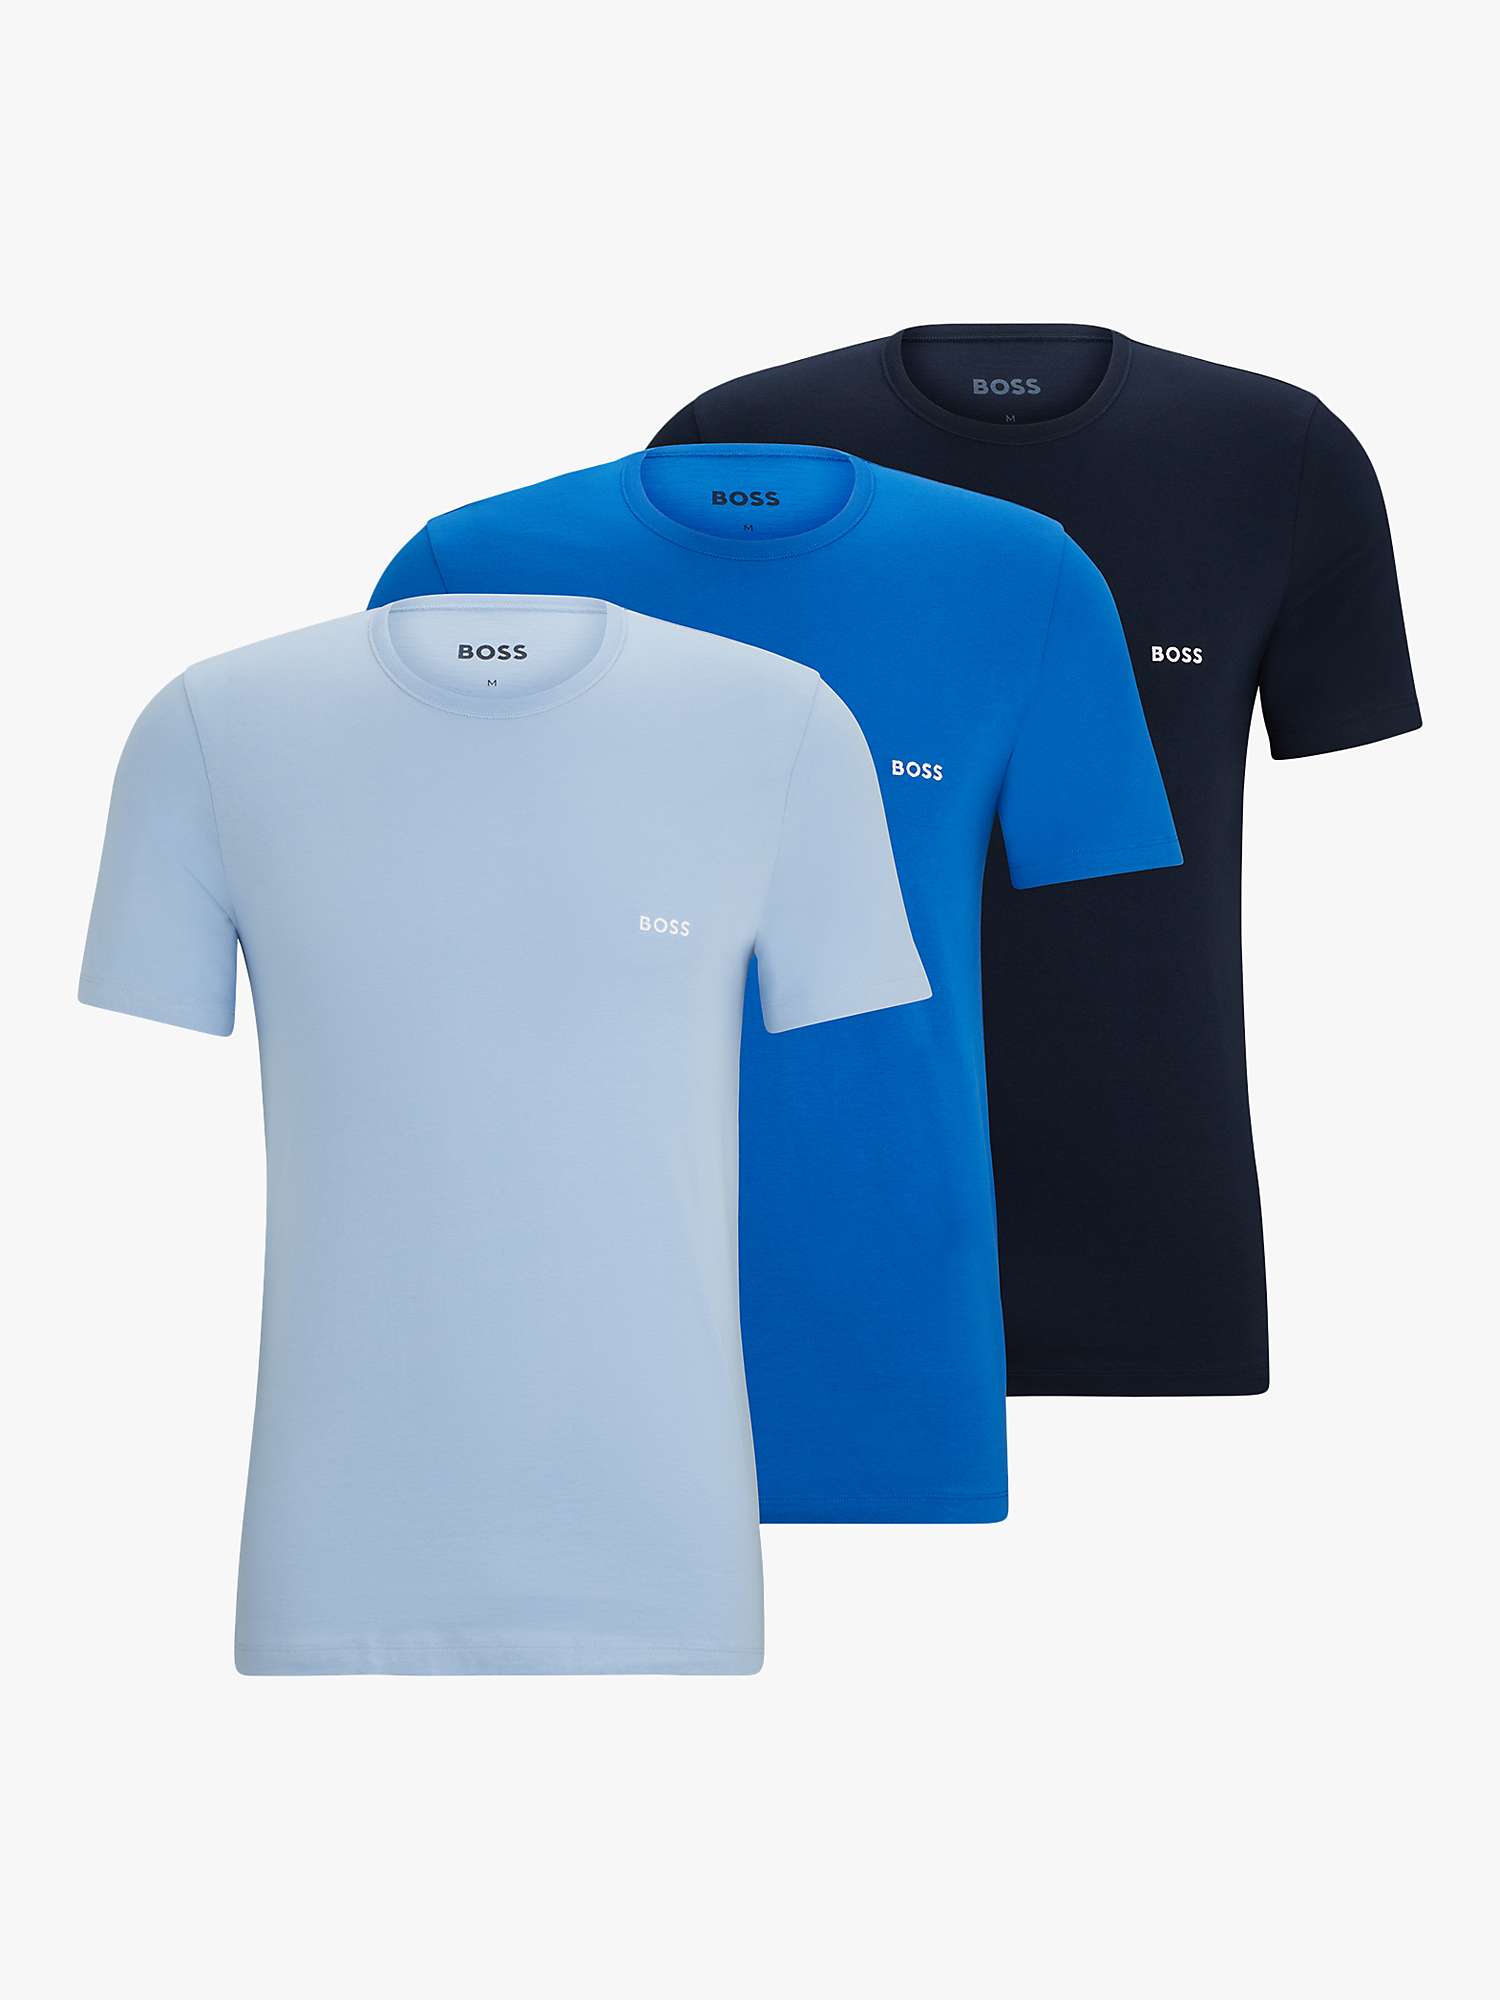 Buy BOSS Essential Style Classic Bodywear T-Shirt, Pack of 3 Online at johnlewis.com